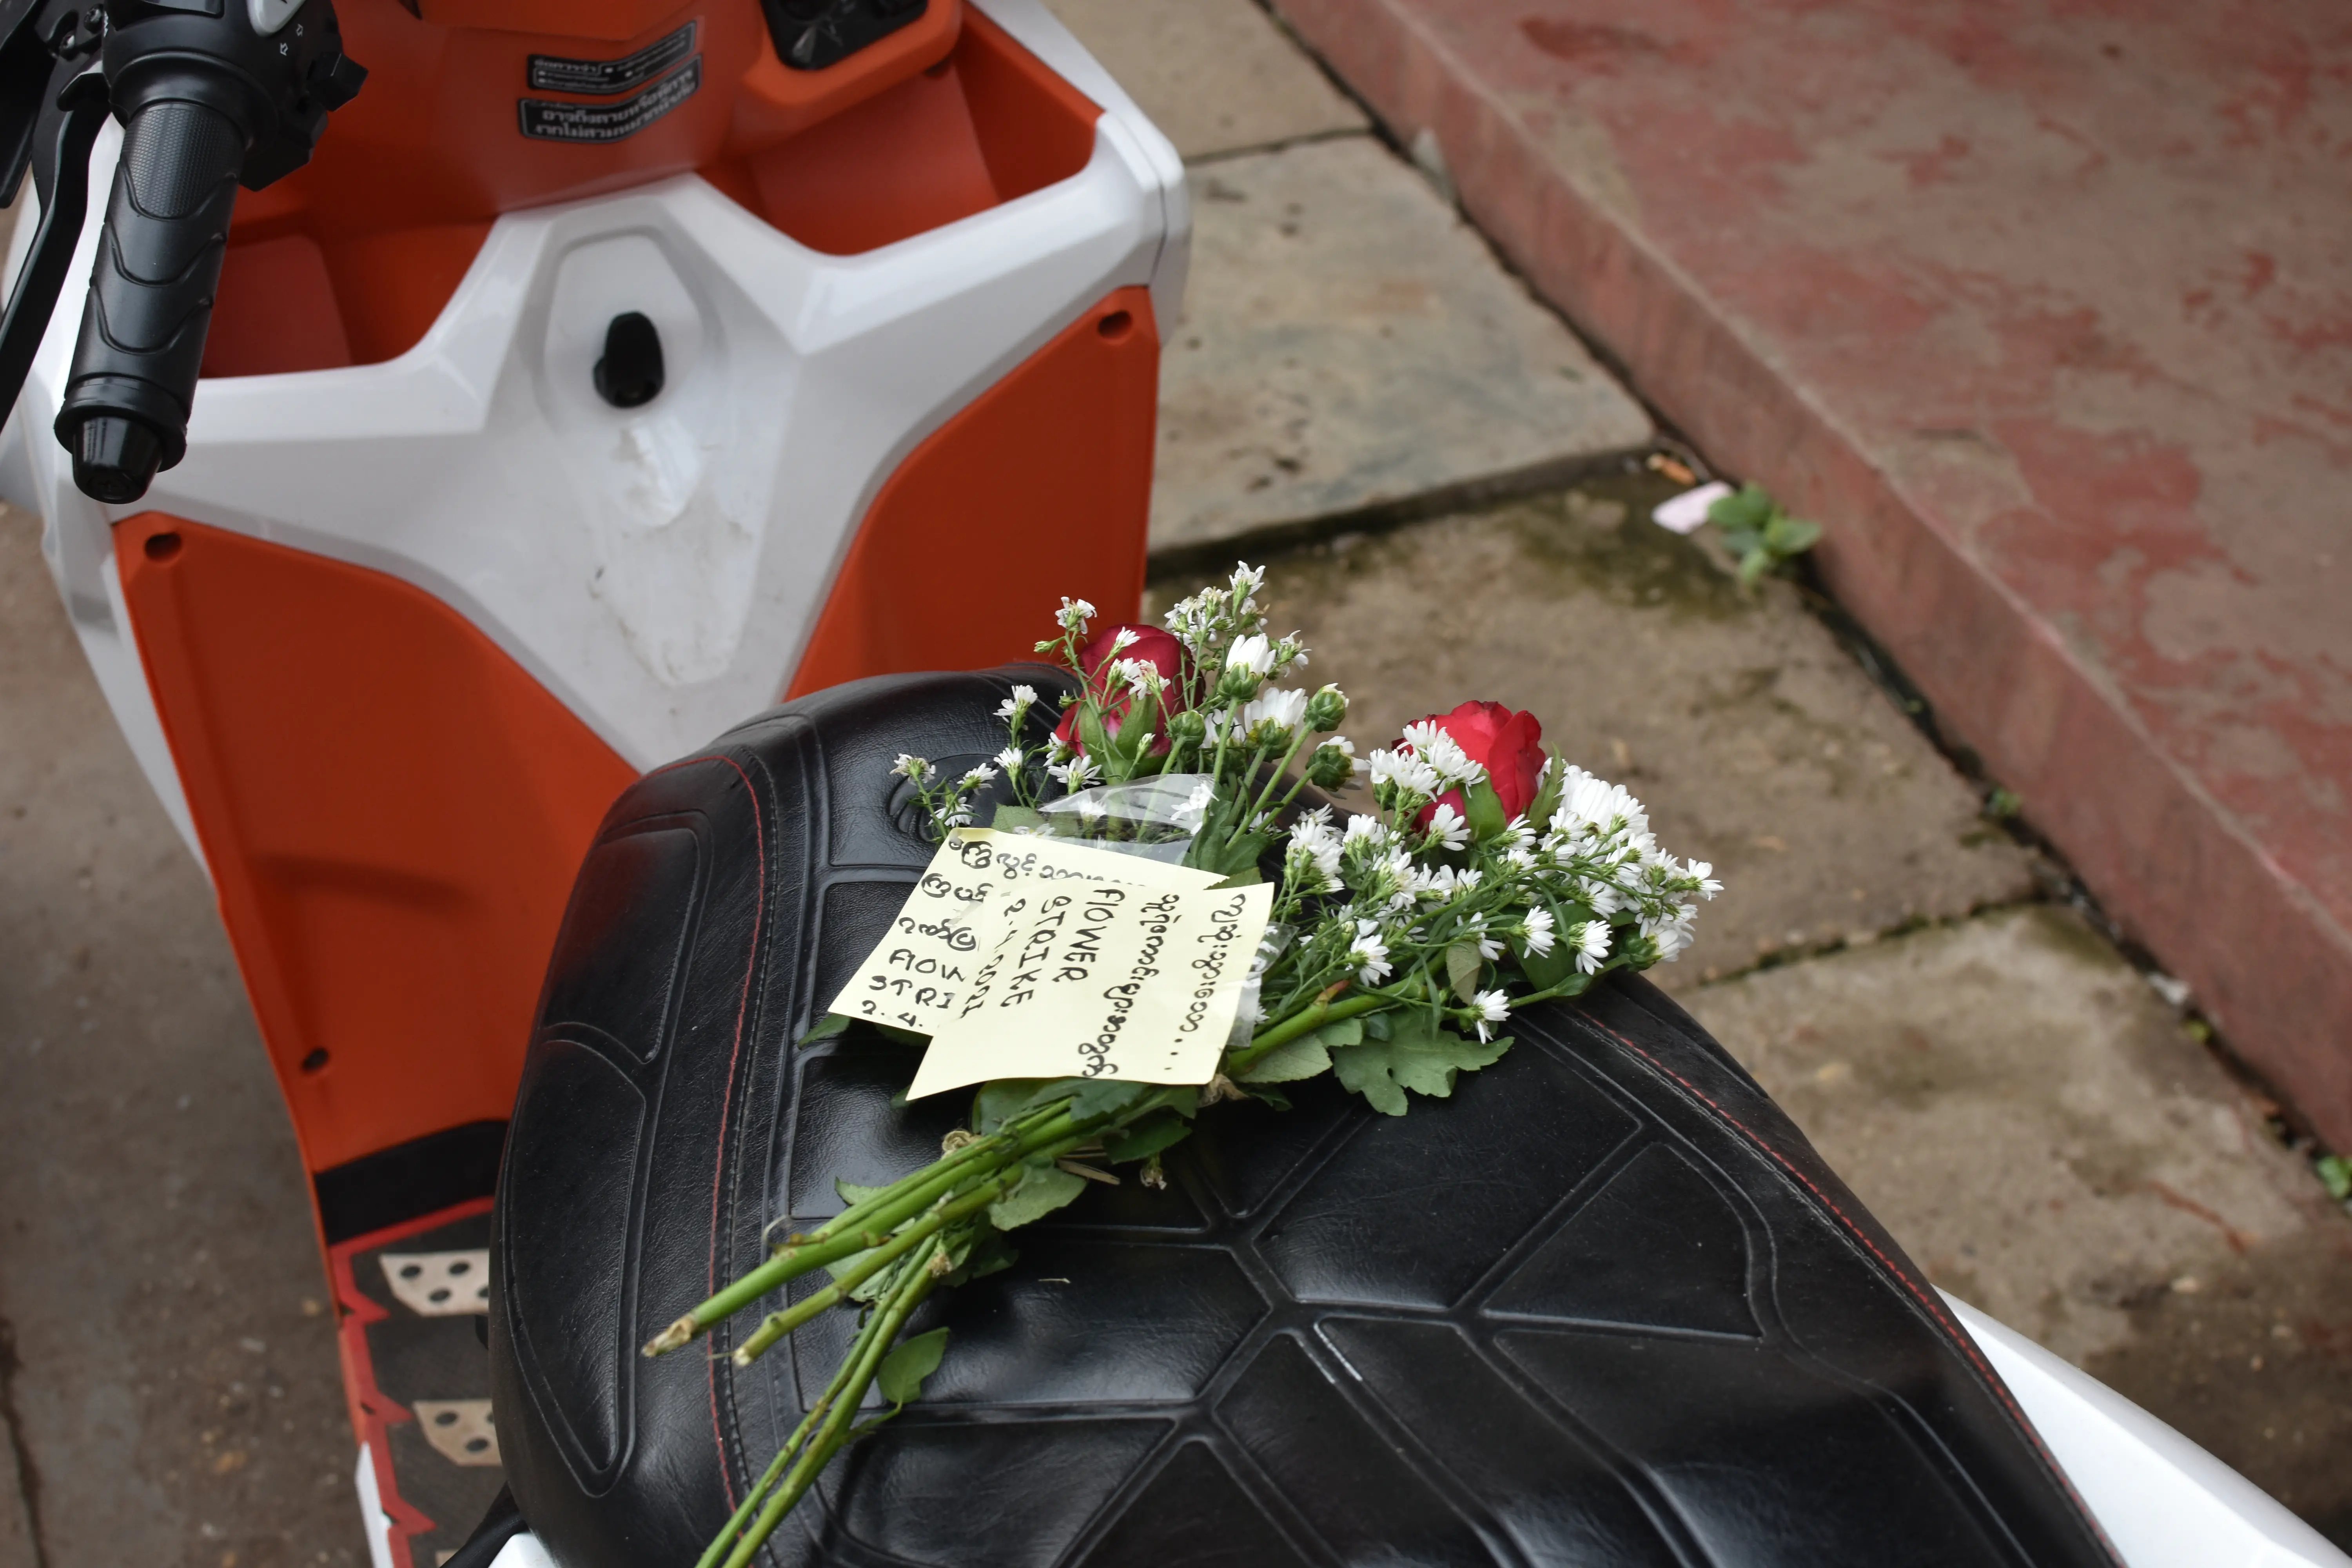 Flowers and notes sit on the seat of a parked motorbike.